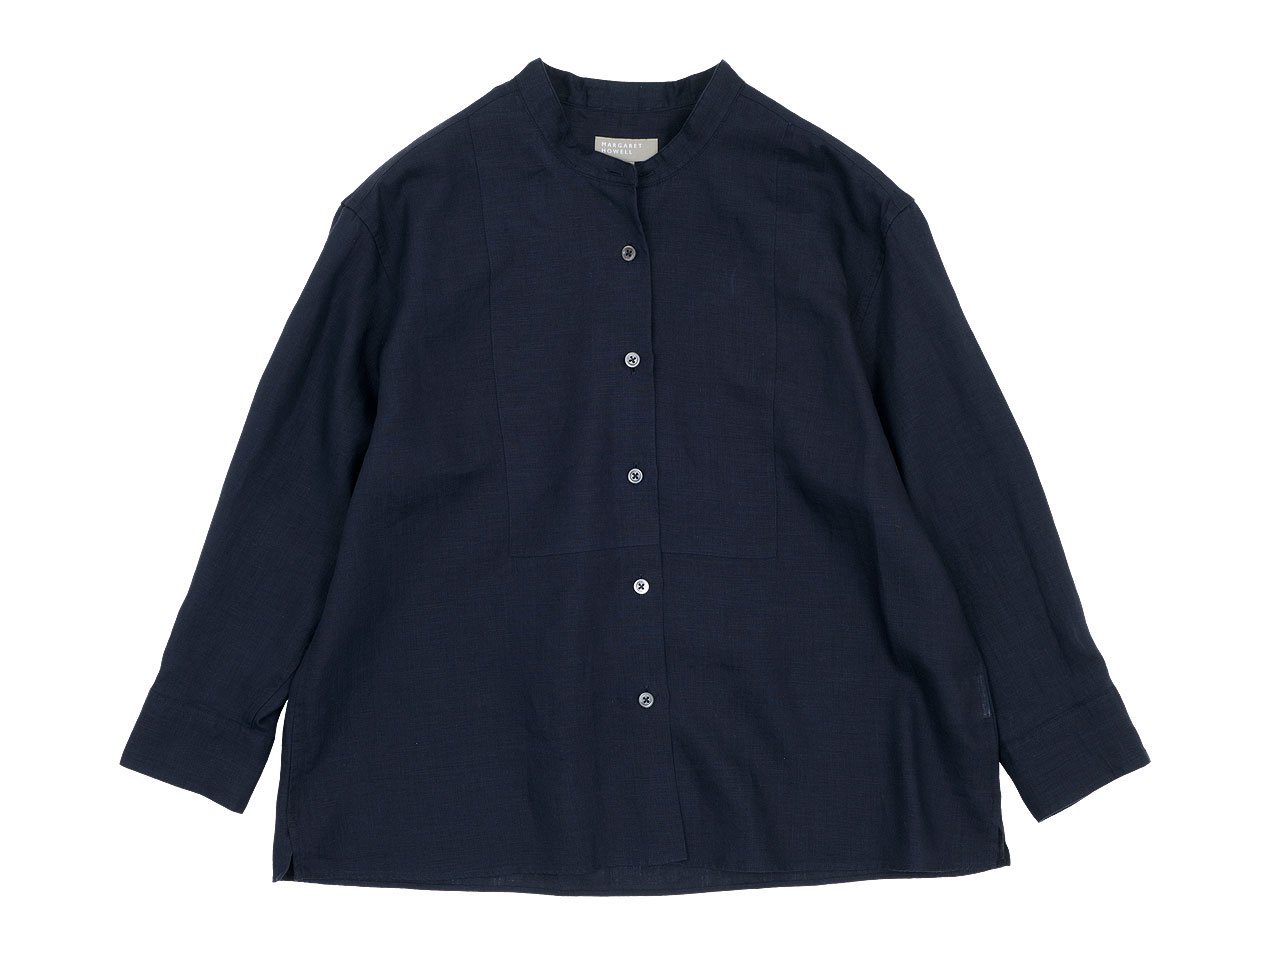 MARGARET HOWELL LINEN VOILE NO COLLAR SHIRTS 23CHARCOAL〔レディース〕